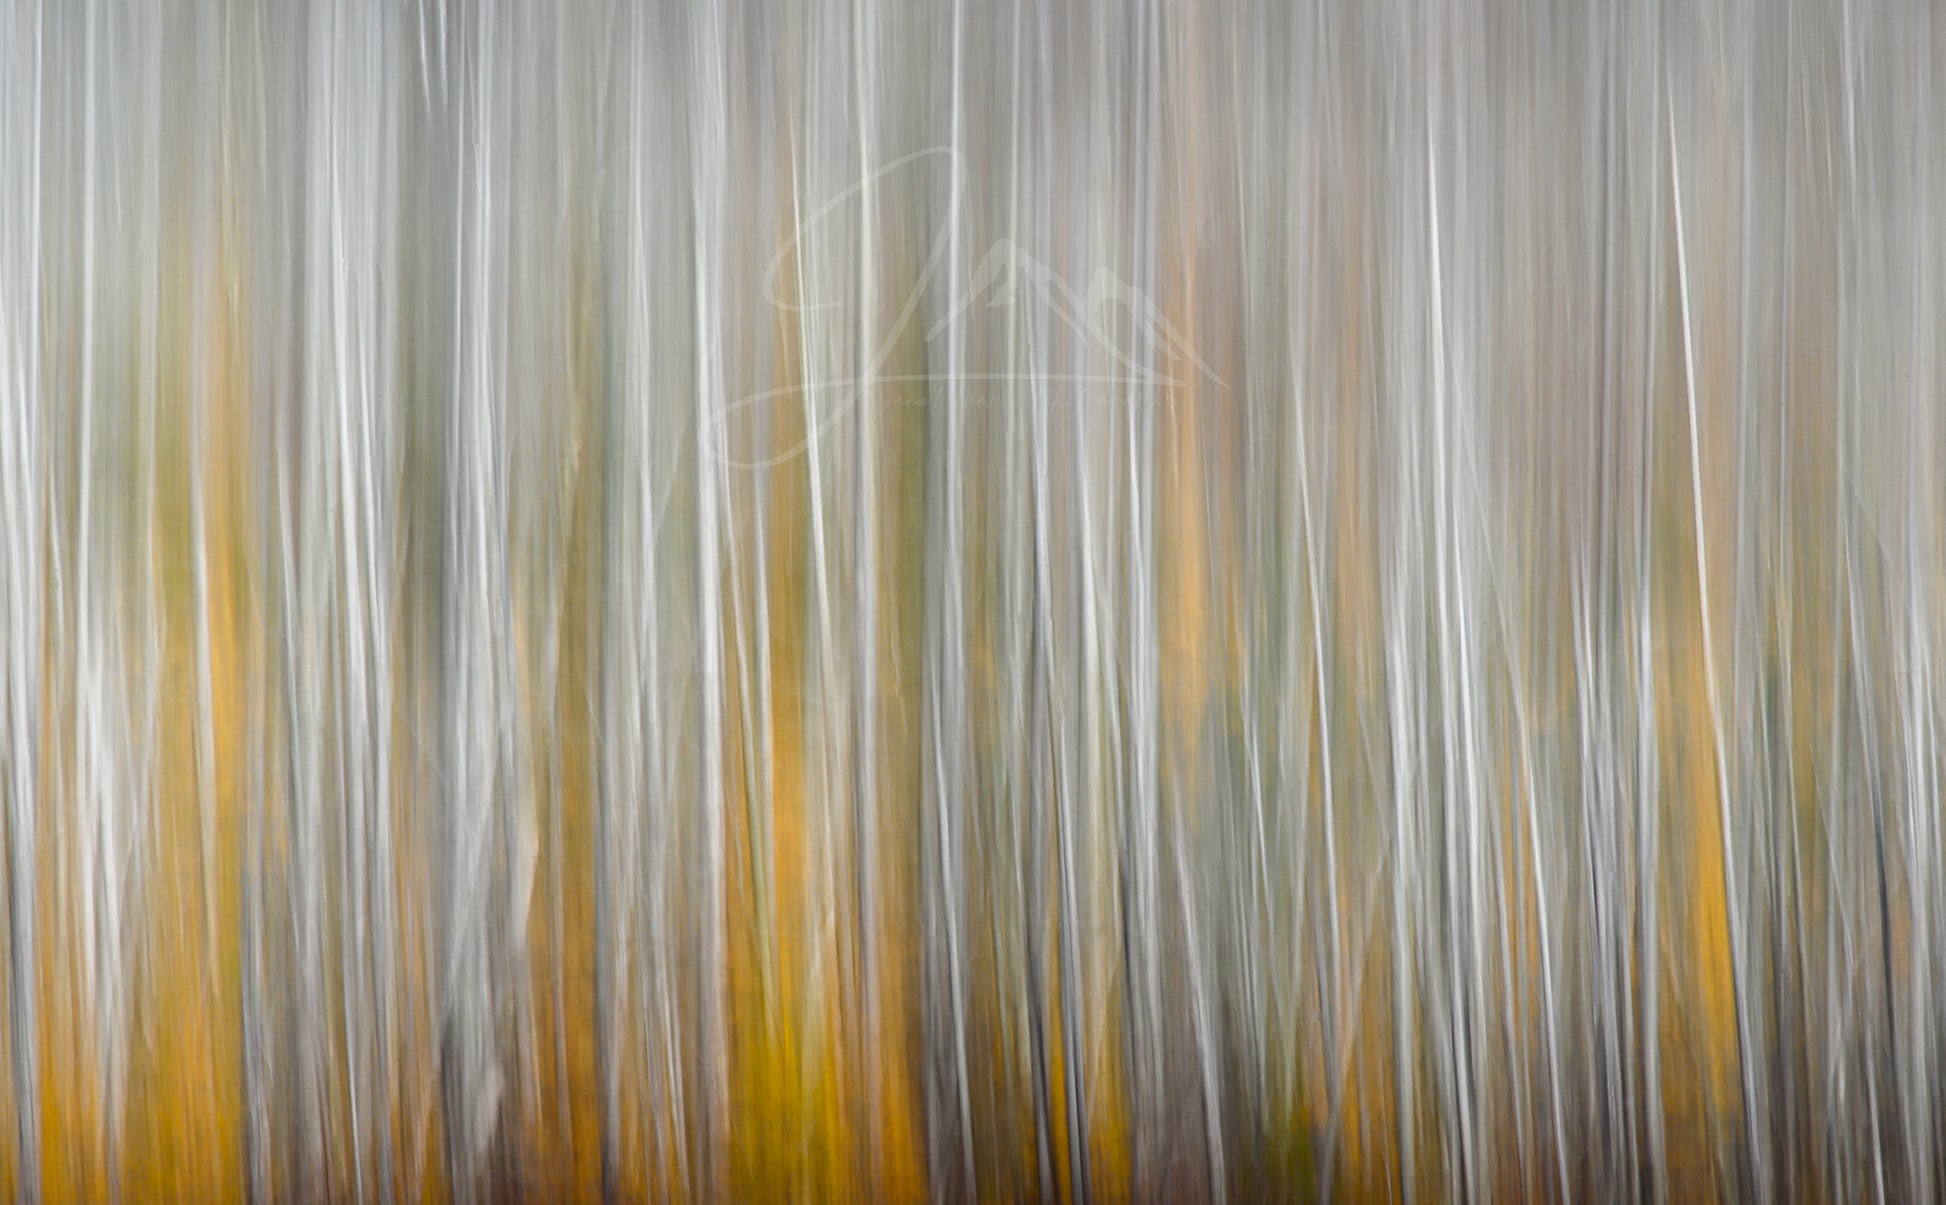 Abstract Autumn image of birch and tamarack trees in an adirondack forest